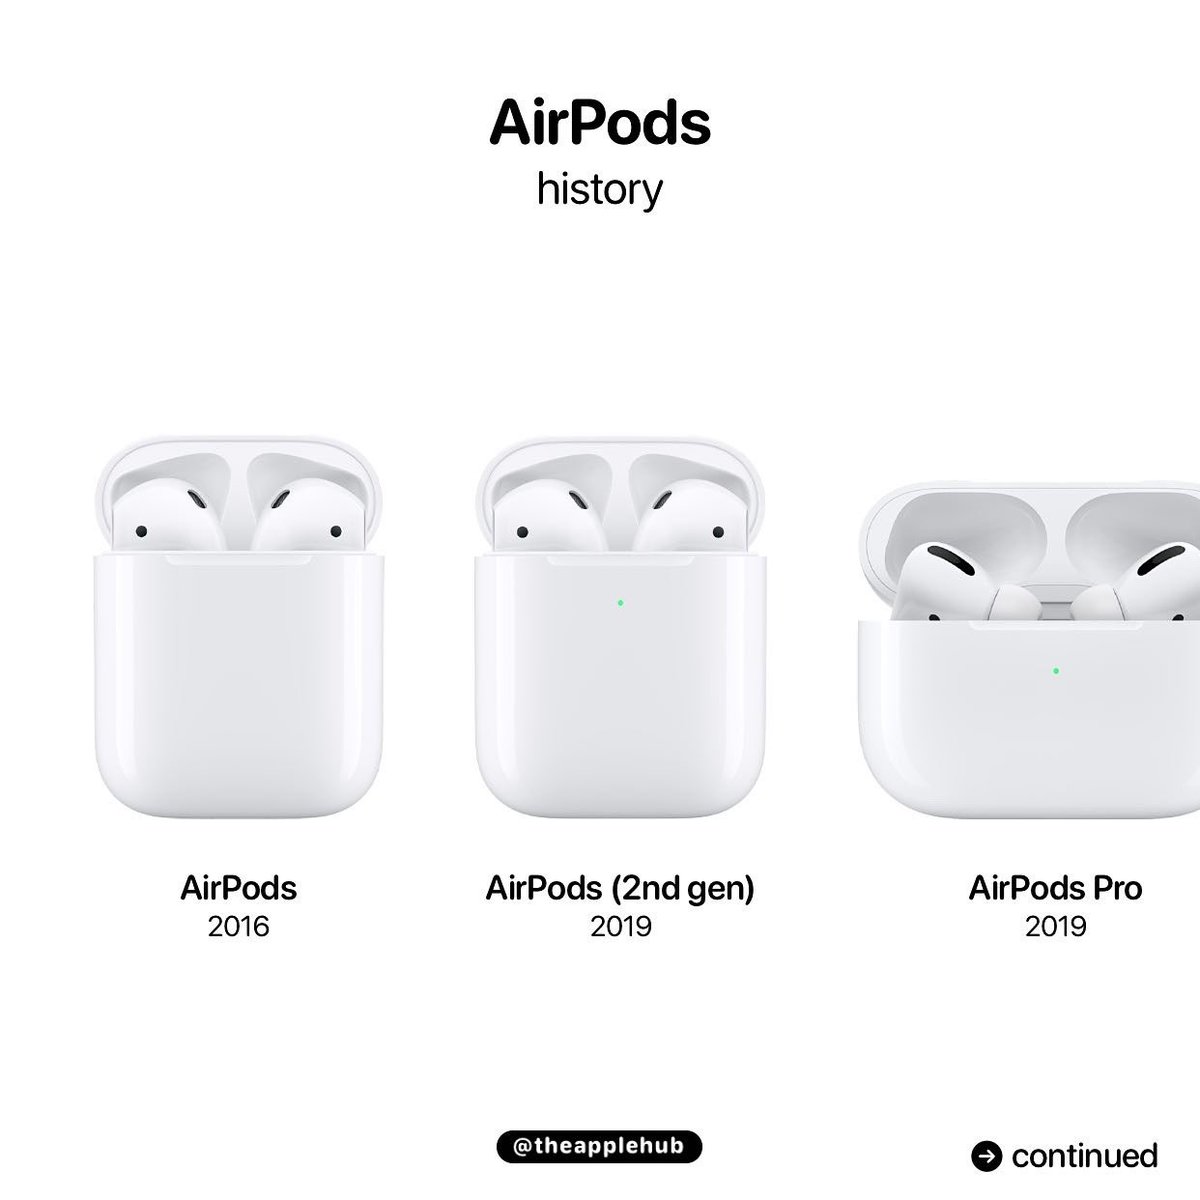 Ventilere Deqenereret web Apple Hub on X: "5 years of AirPods! Which ones do you have?  https://t.co/XEpikTt4XQ" / X